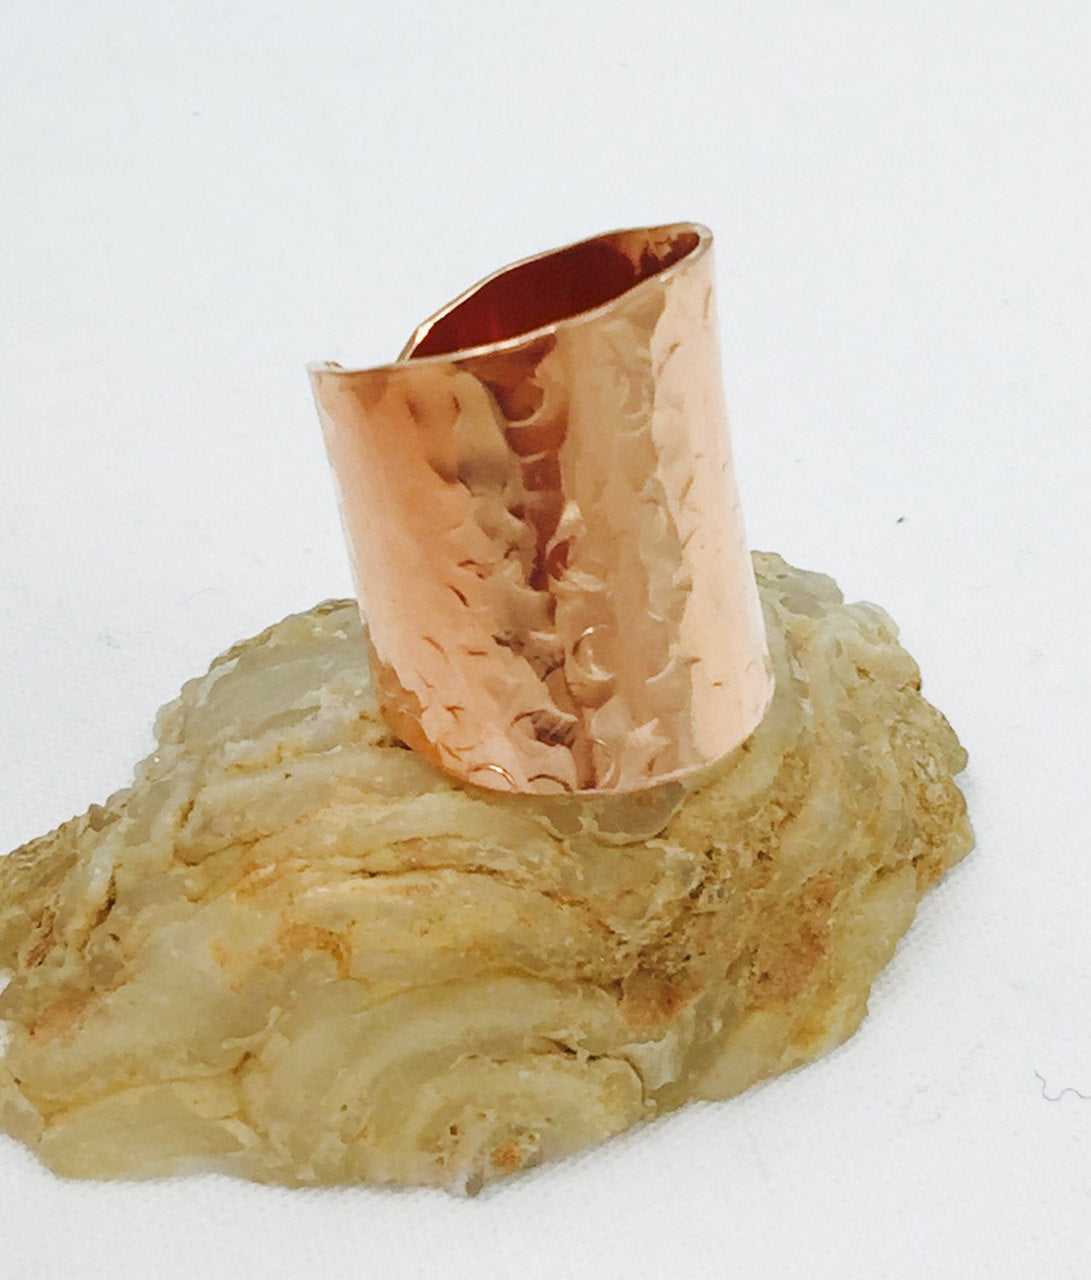 Wide Band Hammered Copper Ring Champagne Collection